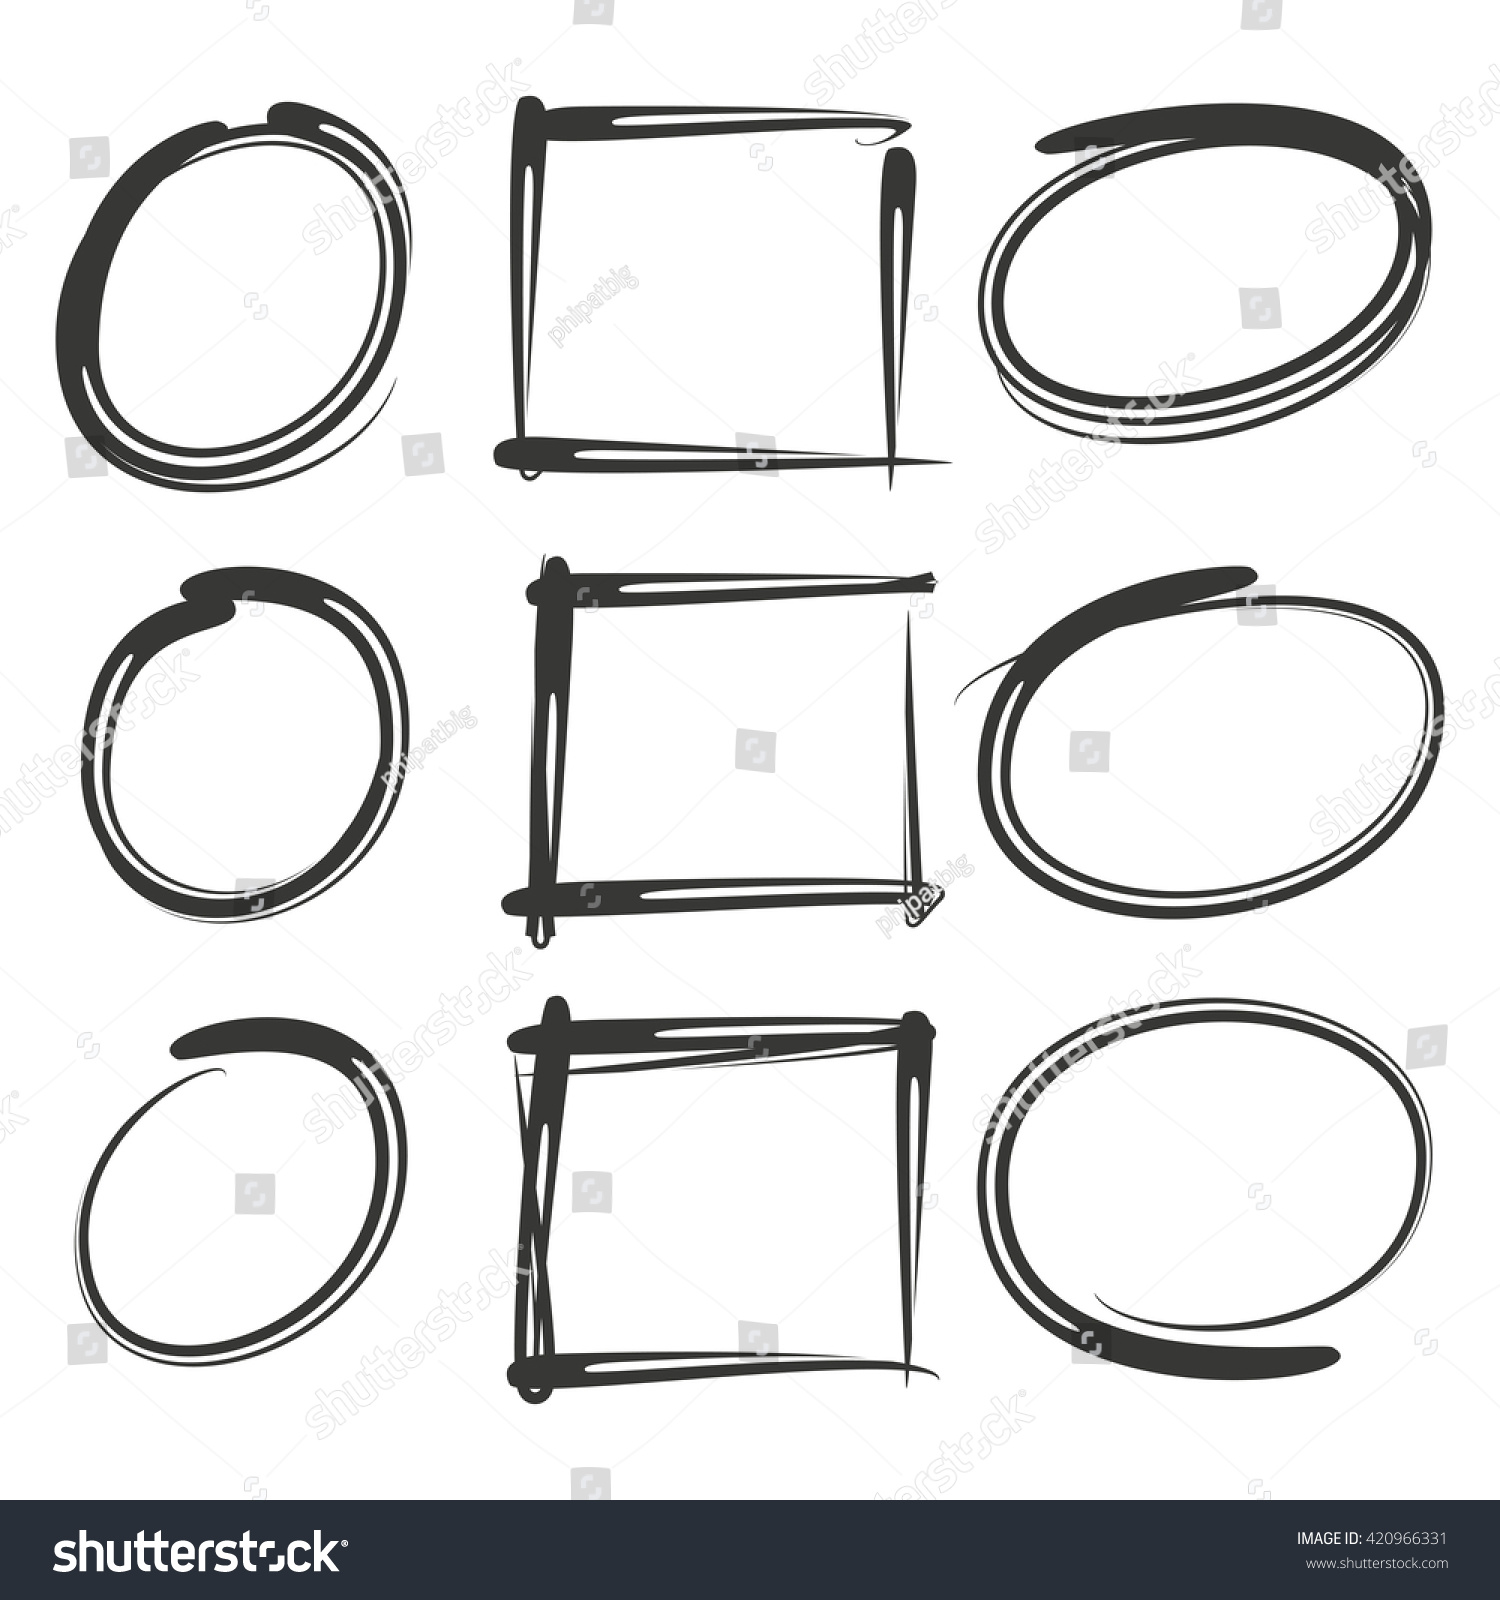 Download Vector Highlighter Elements Circle Rectangle Marker Stock ...